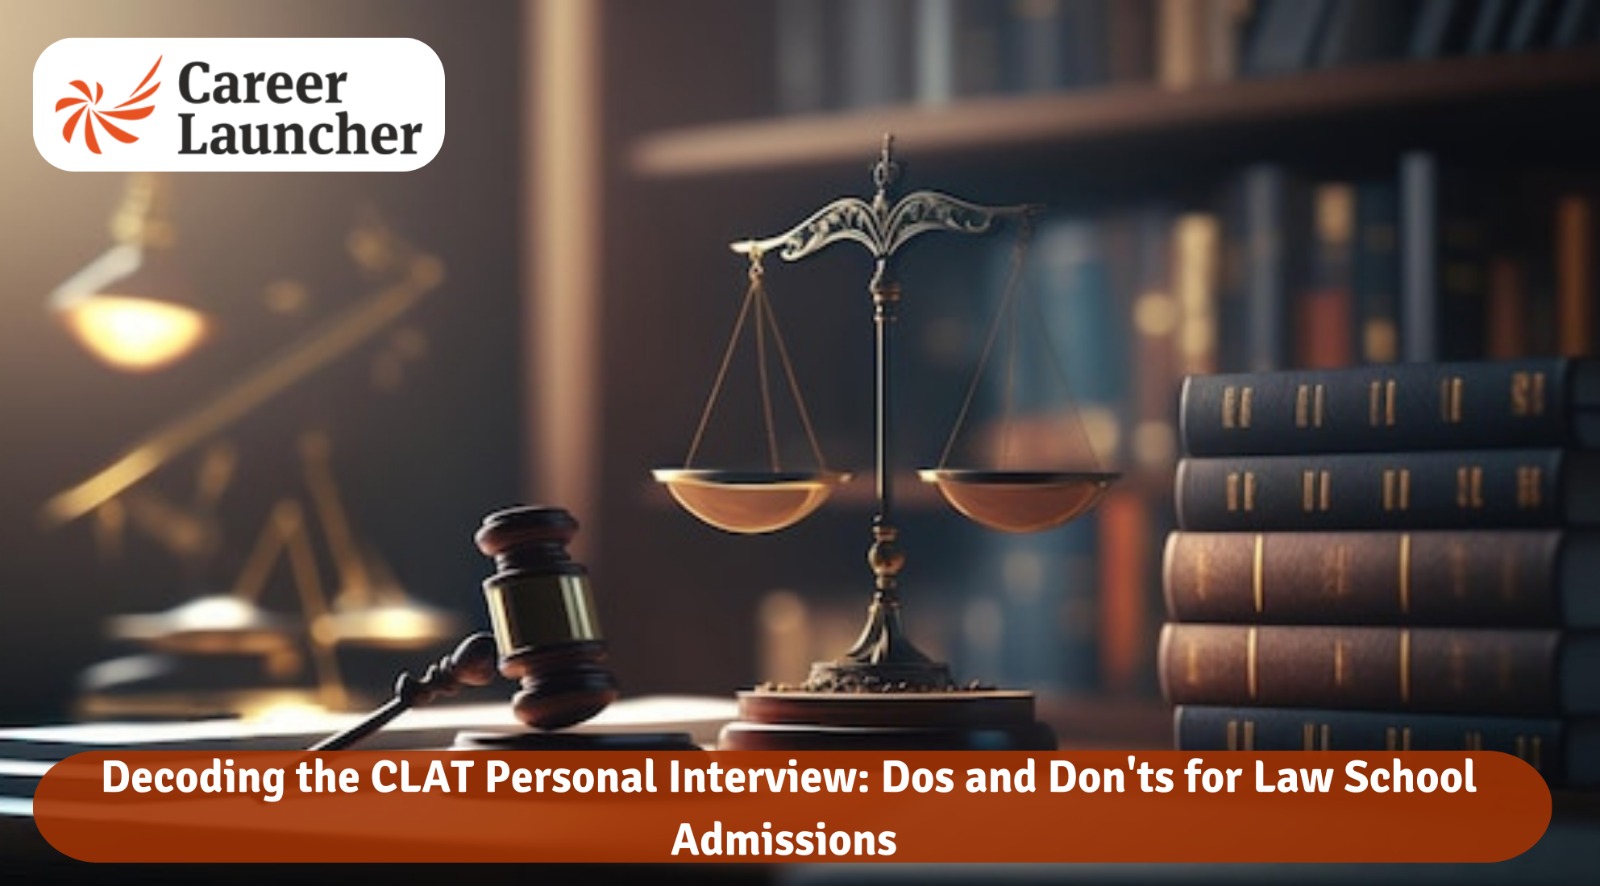 Decoding the CLAT Personal Interview: Dos and Don